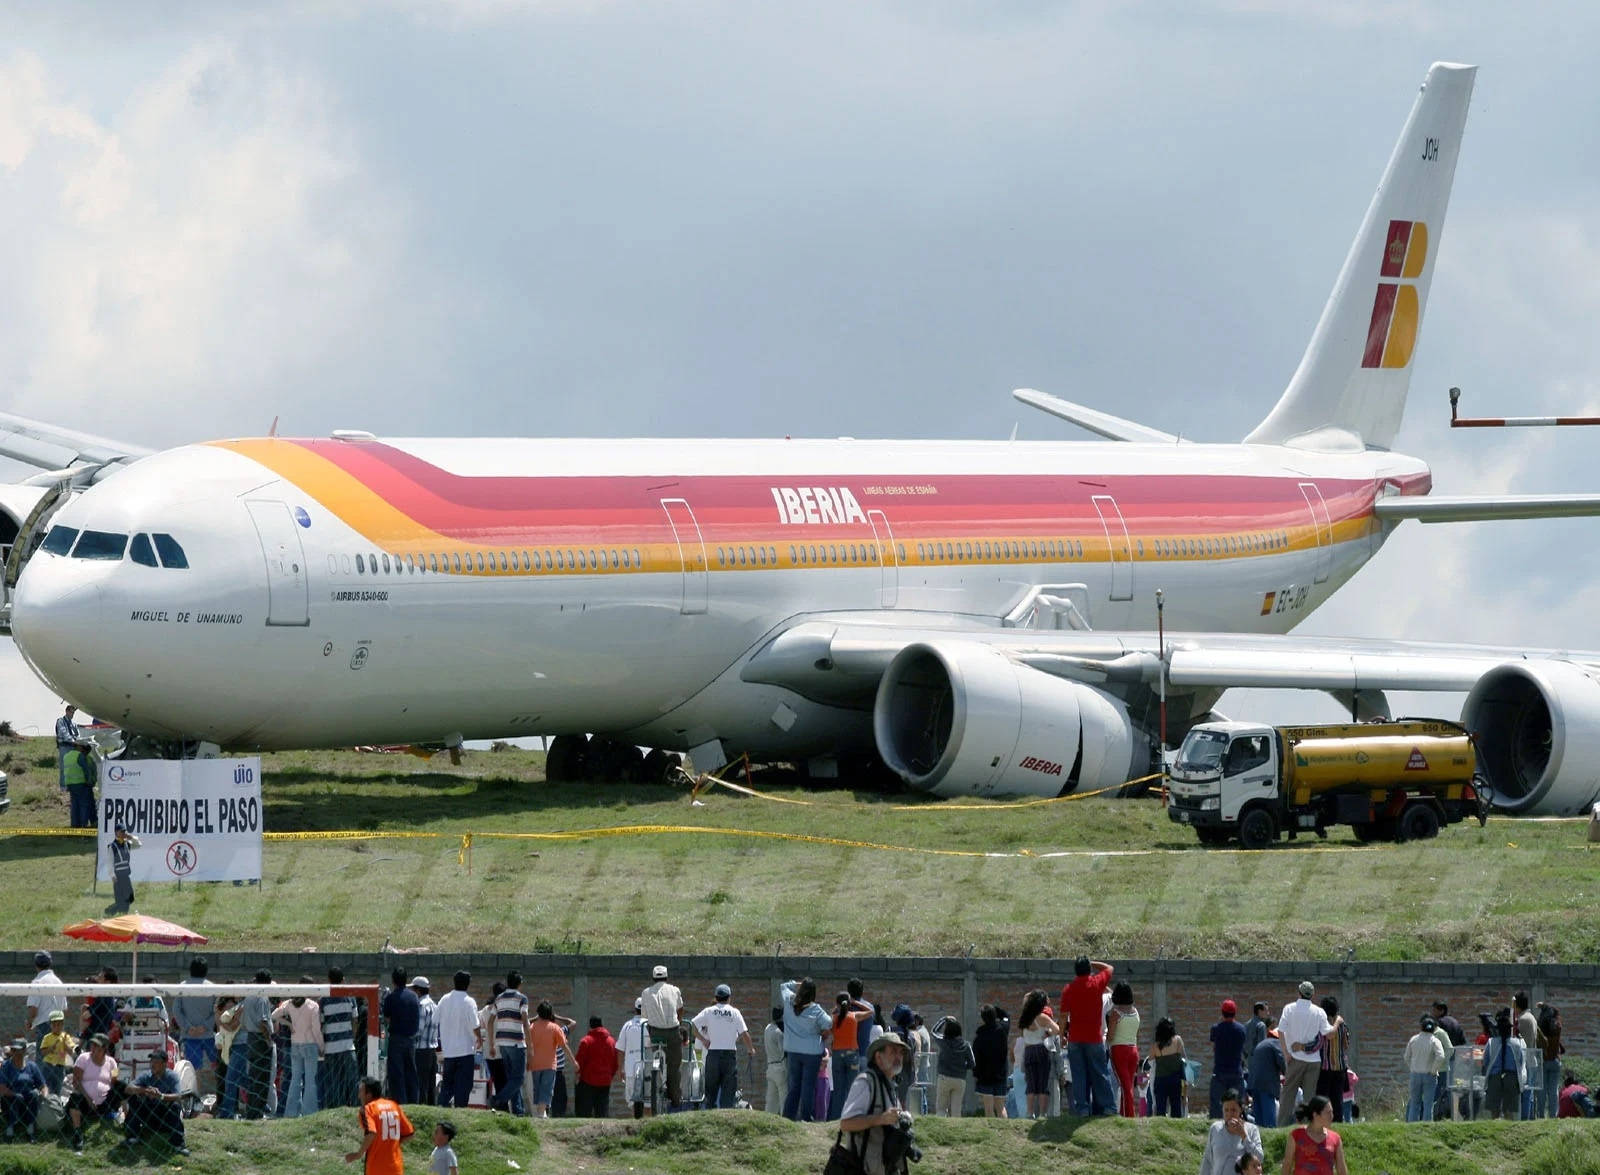 Iberia Airlines Crashed Airplane With Curious Crowd Wallpaper